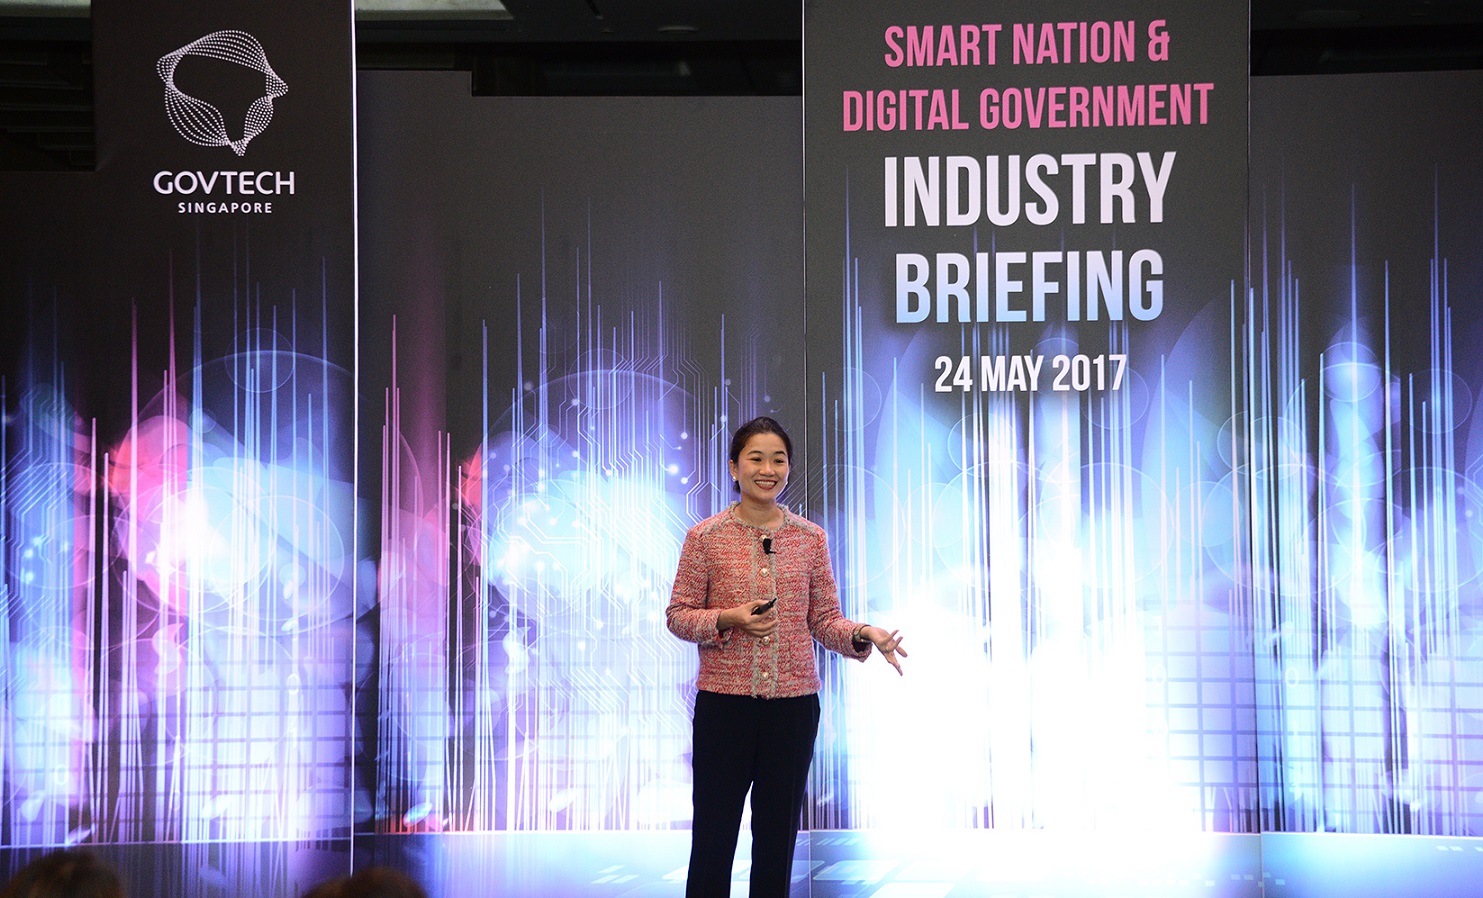 Singapore government to partner industry to spark innovation and build capabilities in a Smart Nation